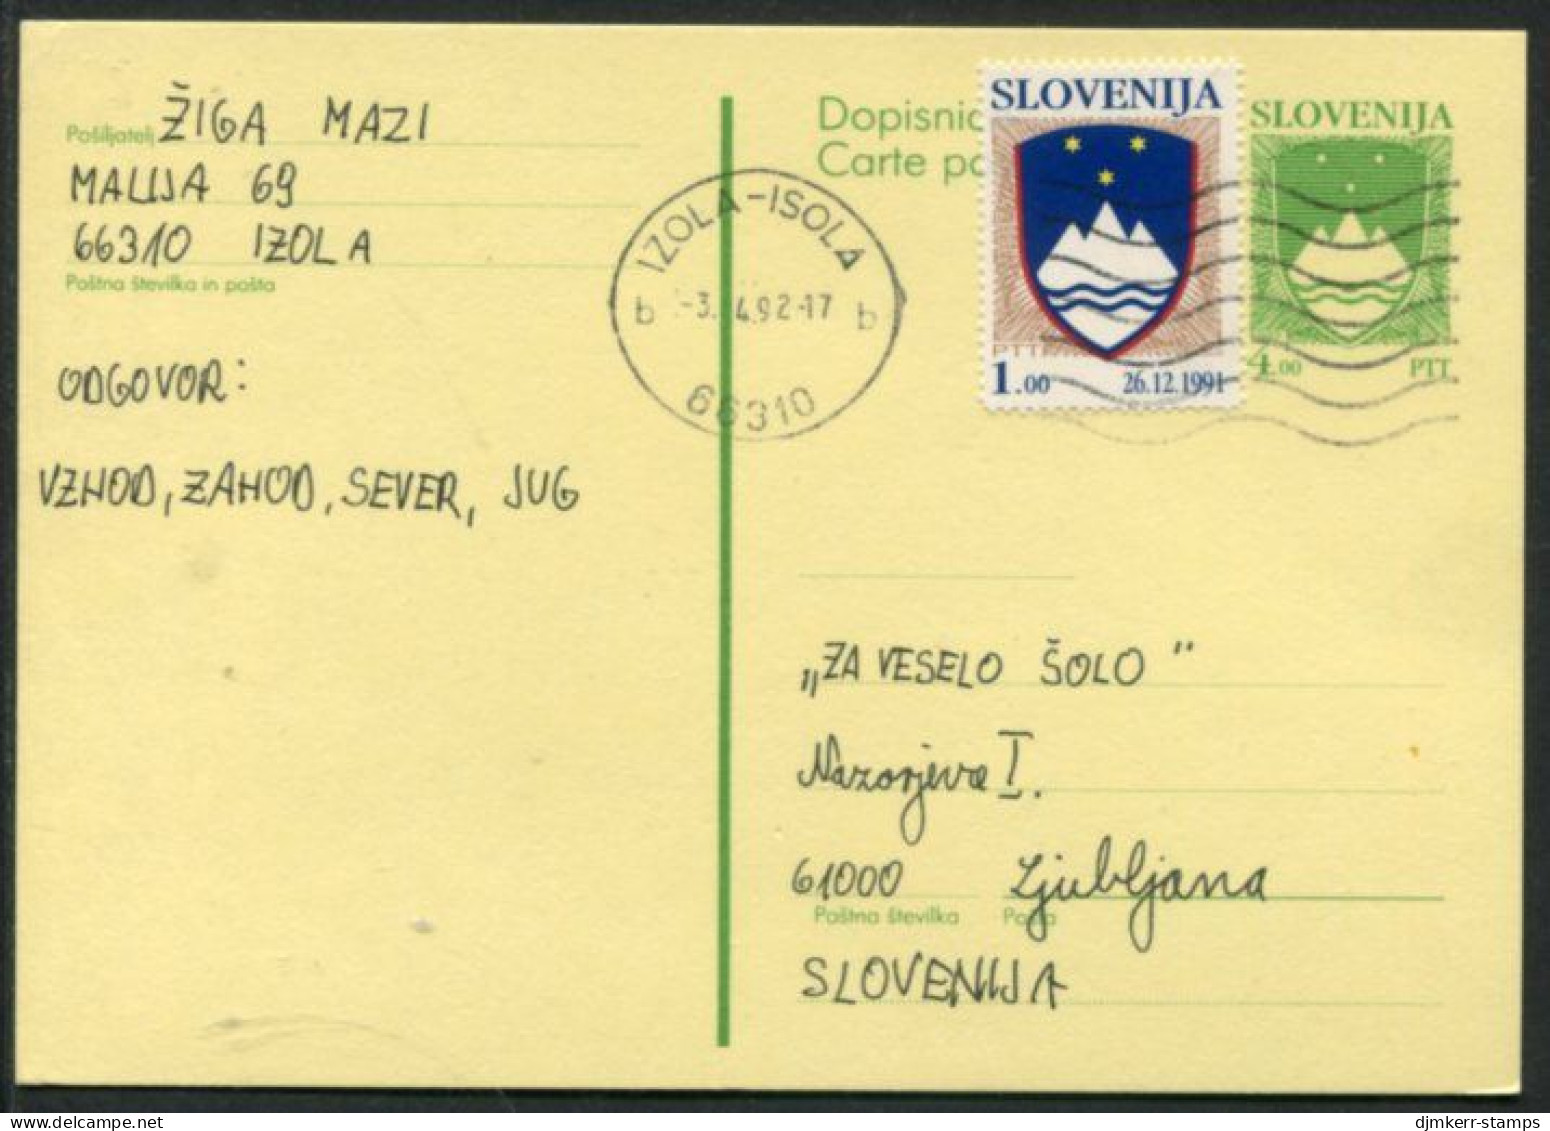 SLOVENIA 1992 4.00 T.  Arms  Stationery Card, Used With Additional 1 T. Stamp.  Michel P1 - Slowenien